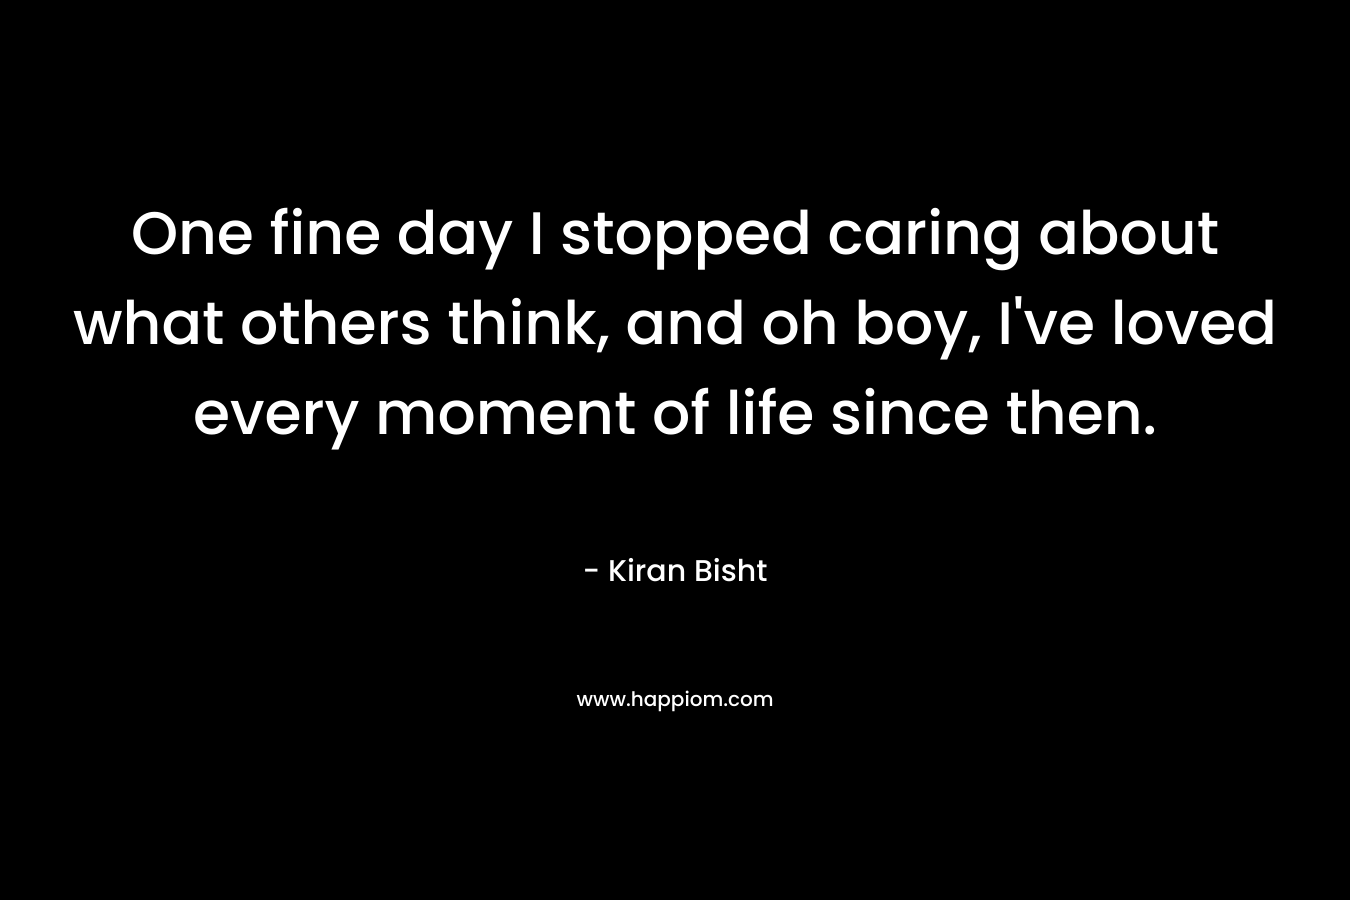 One fine day I stopped caring about what others think, and oh boy, I’ve loved every moment of life since then. – Kiran Bisht